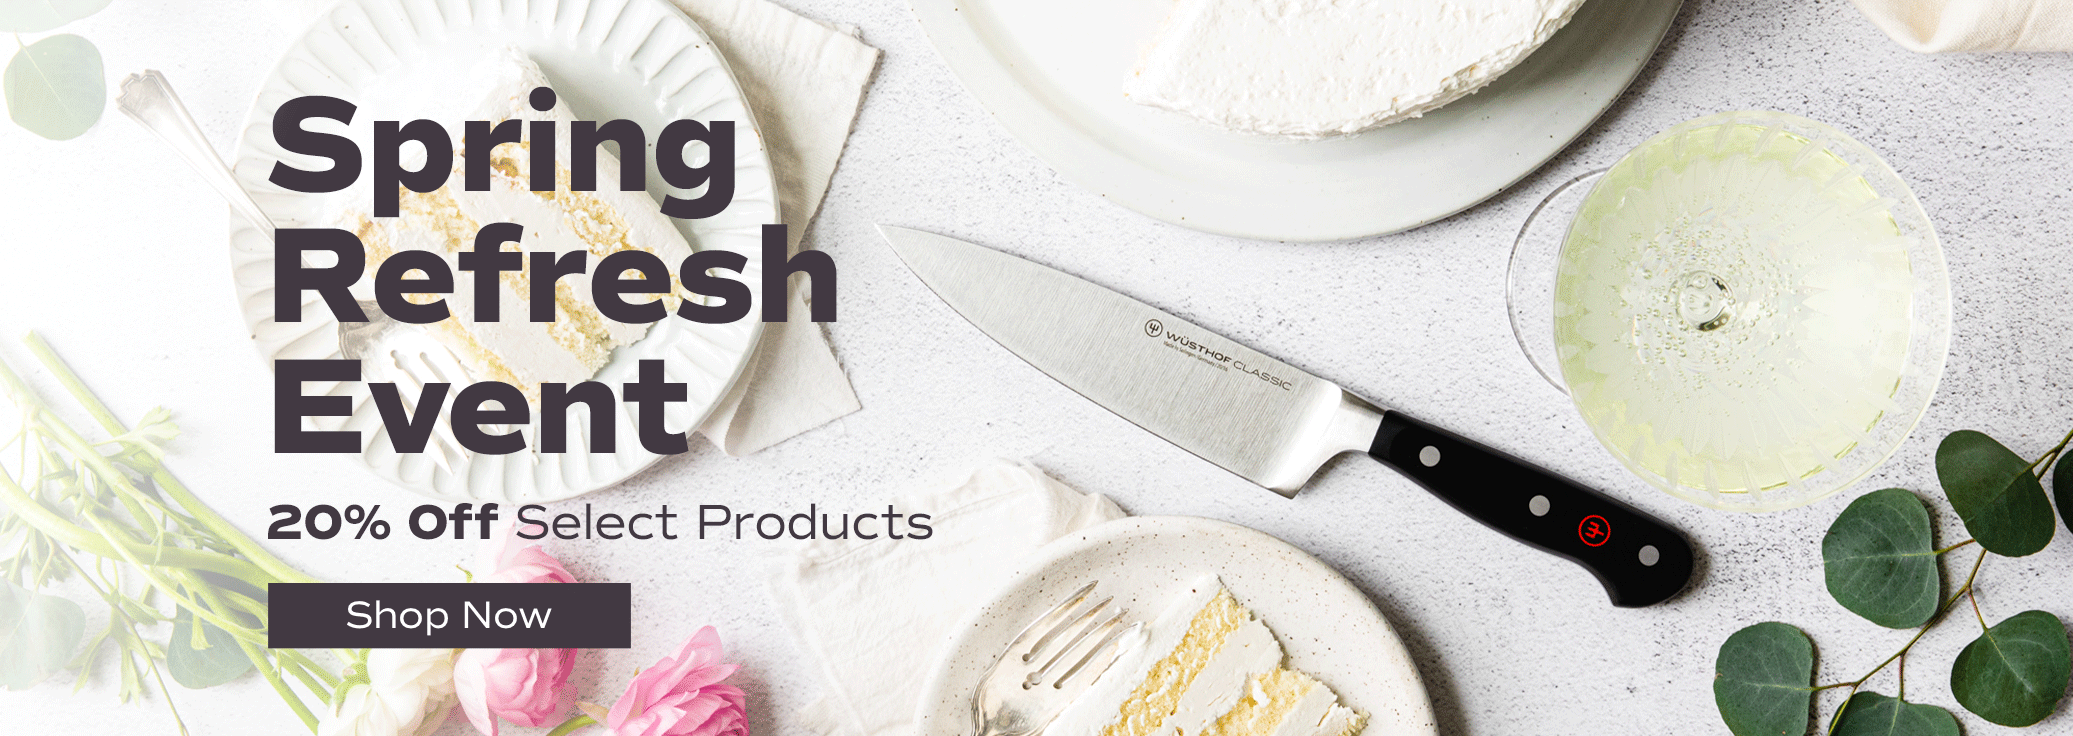 Spring Sale with 6" Classic Chef's Knife next to cake